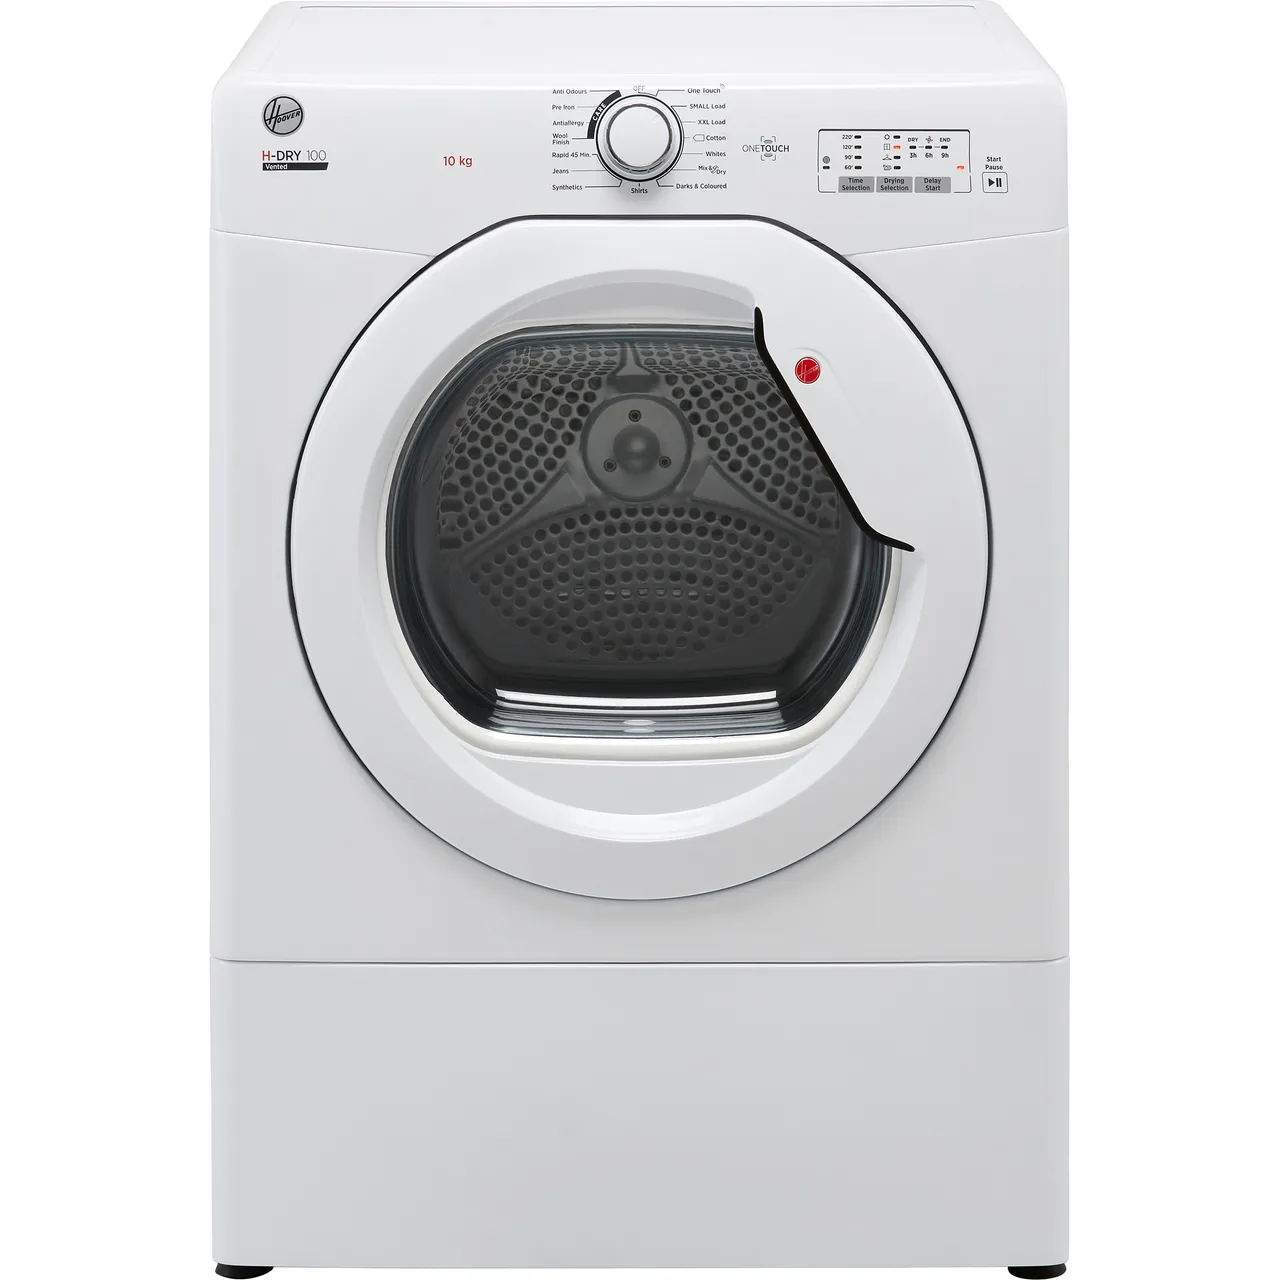 Hoover 10Kg Vented Tumble Dryer White